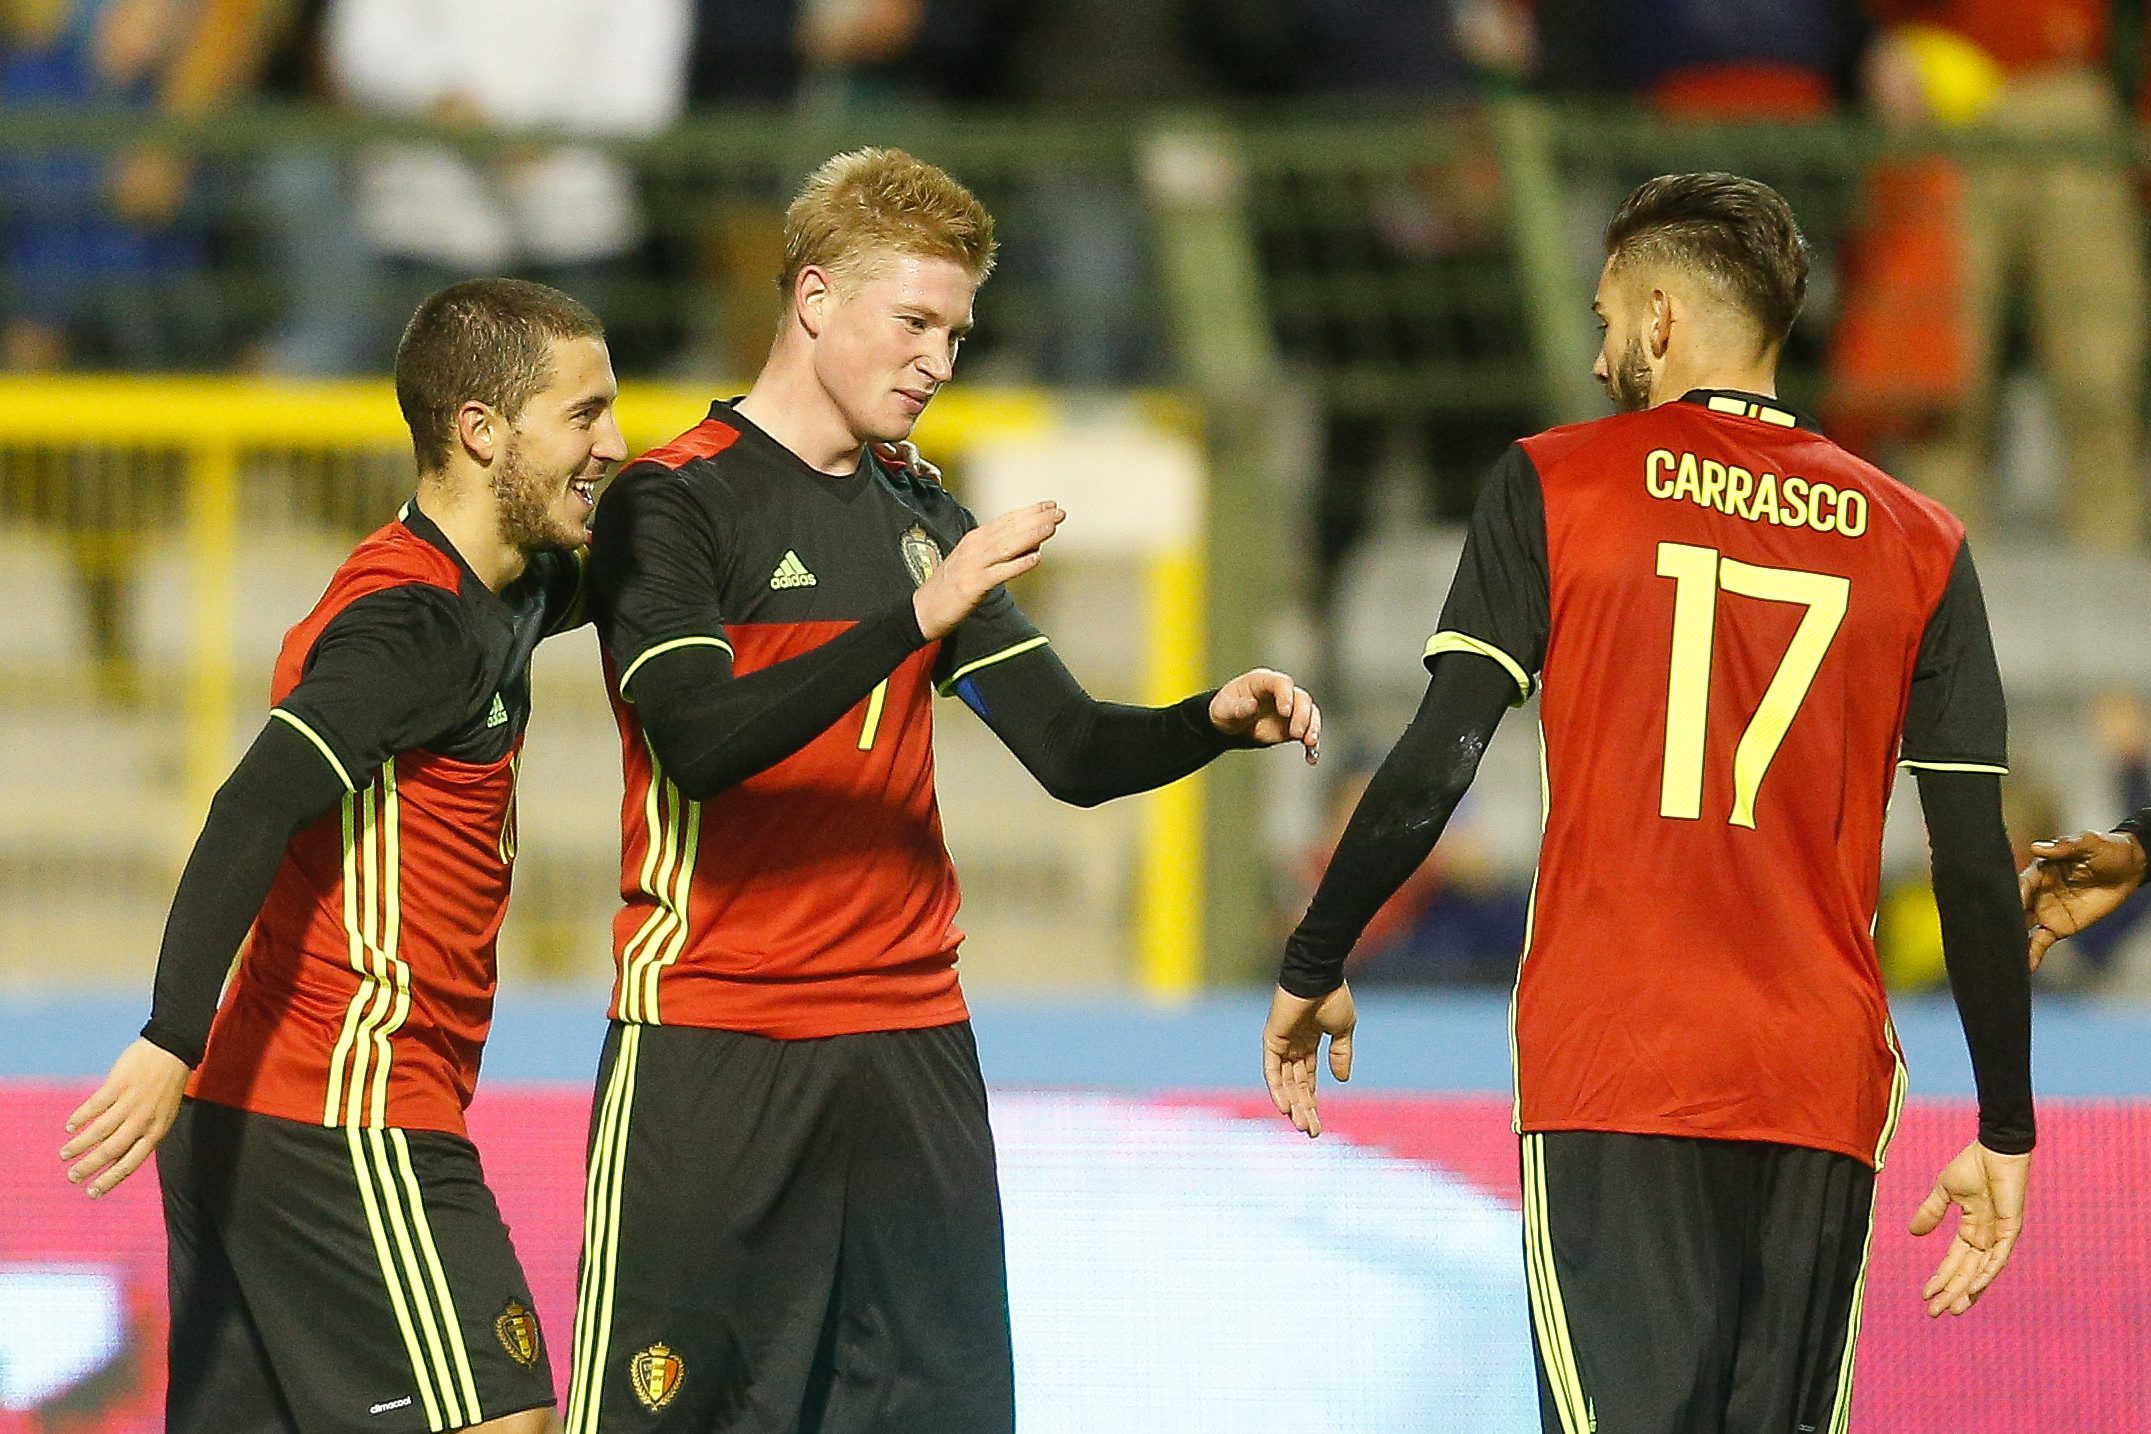 De Bruyne and Hazard might not be available for Belgium against Italy (EPA/LAURENT DUBRULE)